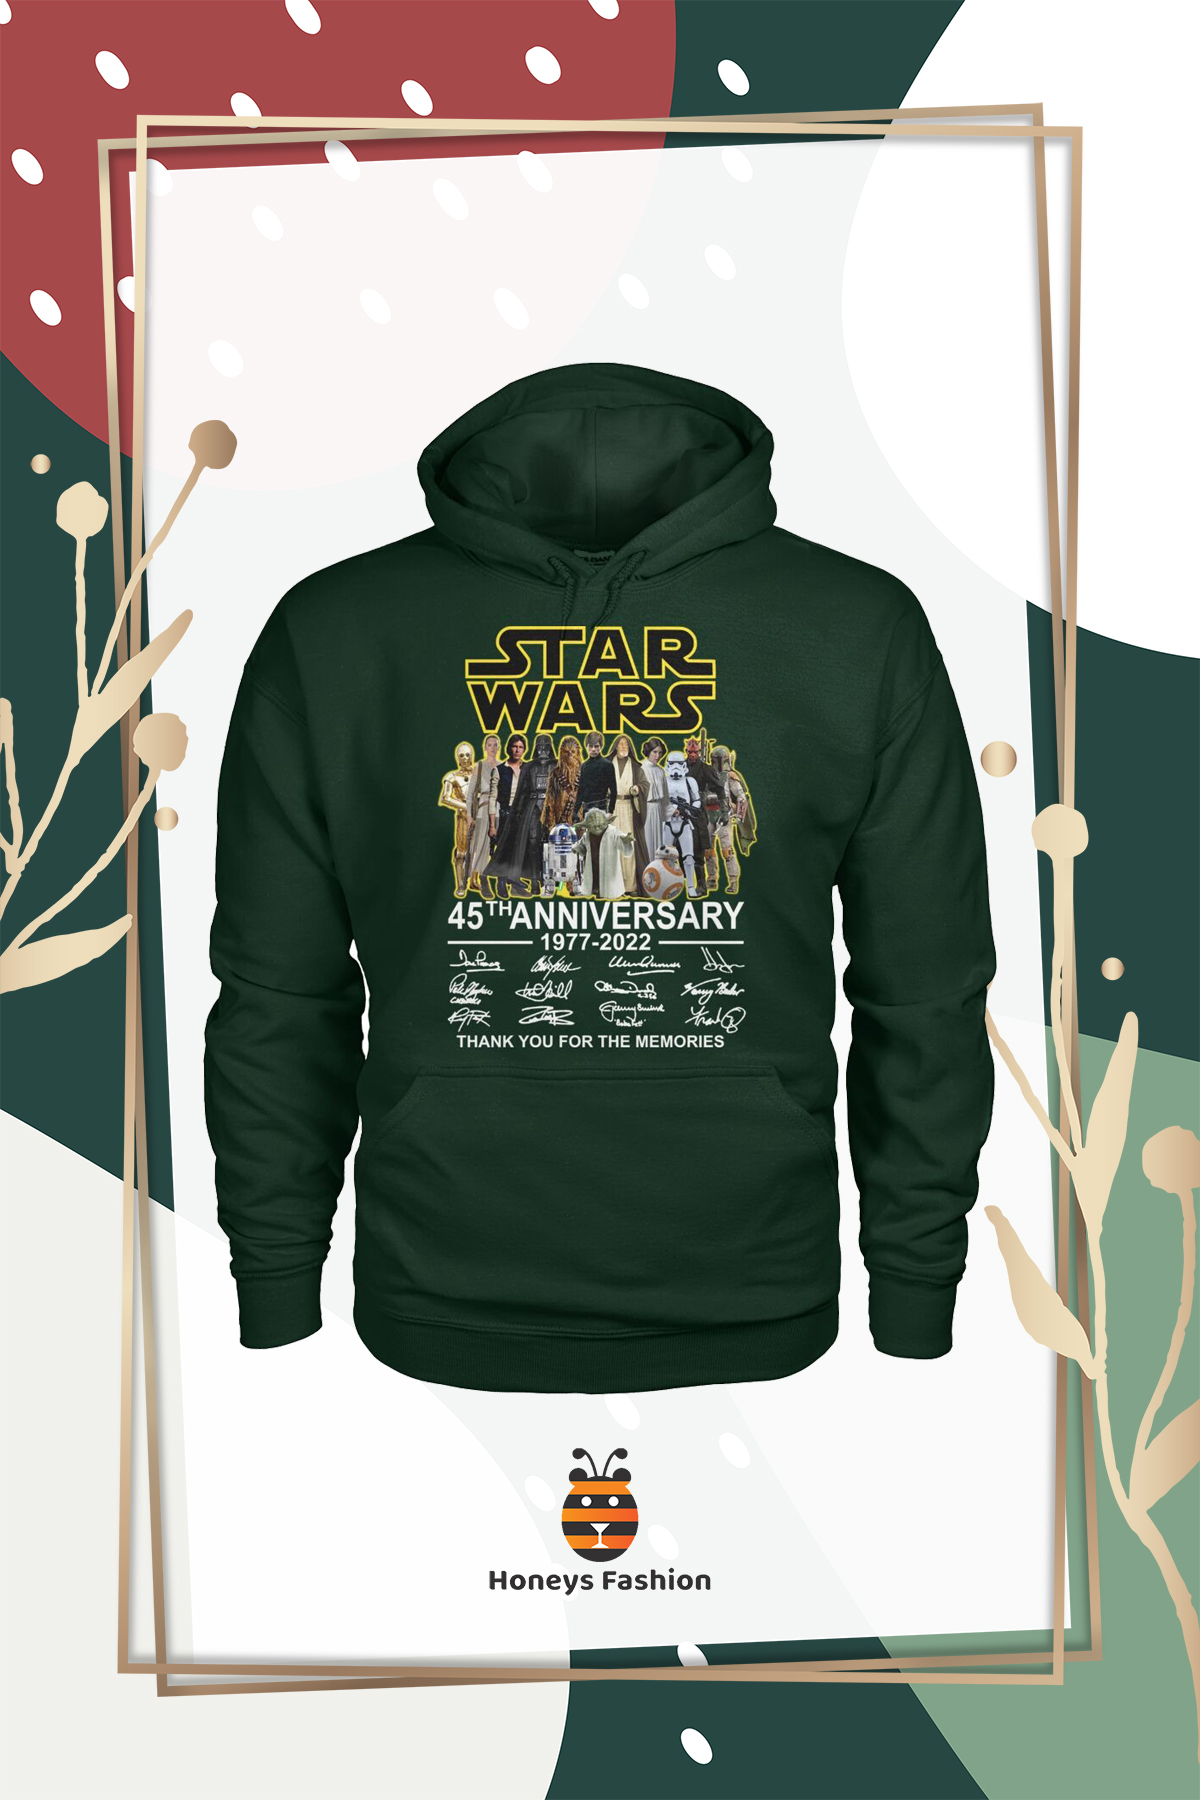 Star Wars 45th Anniversary Signature Thank You For The Memories Shirt Hoodie